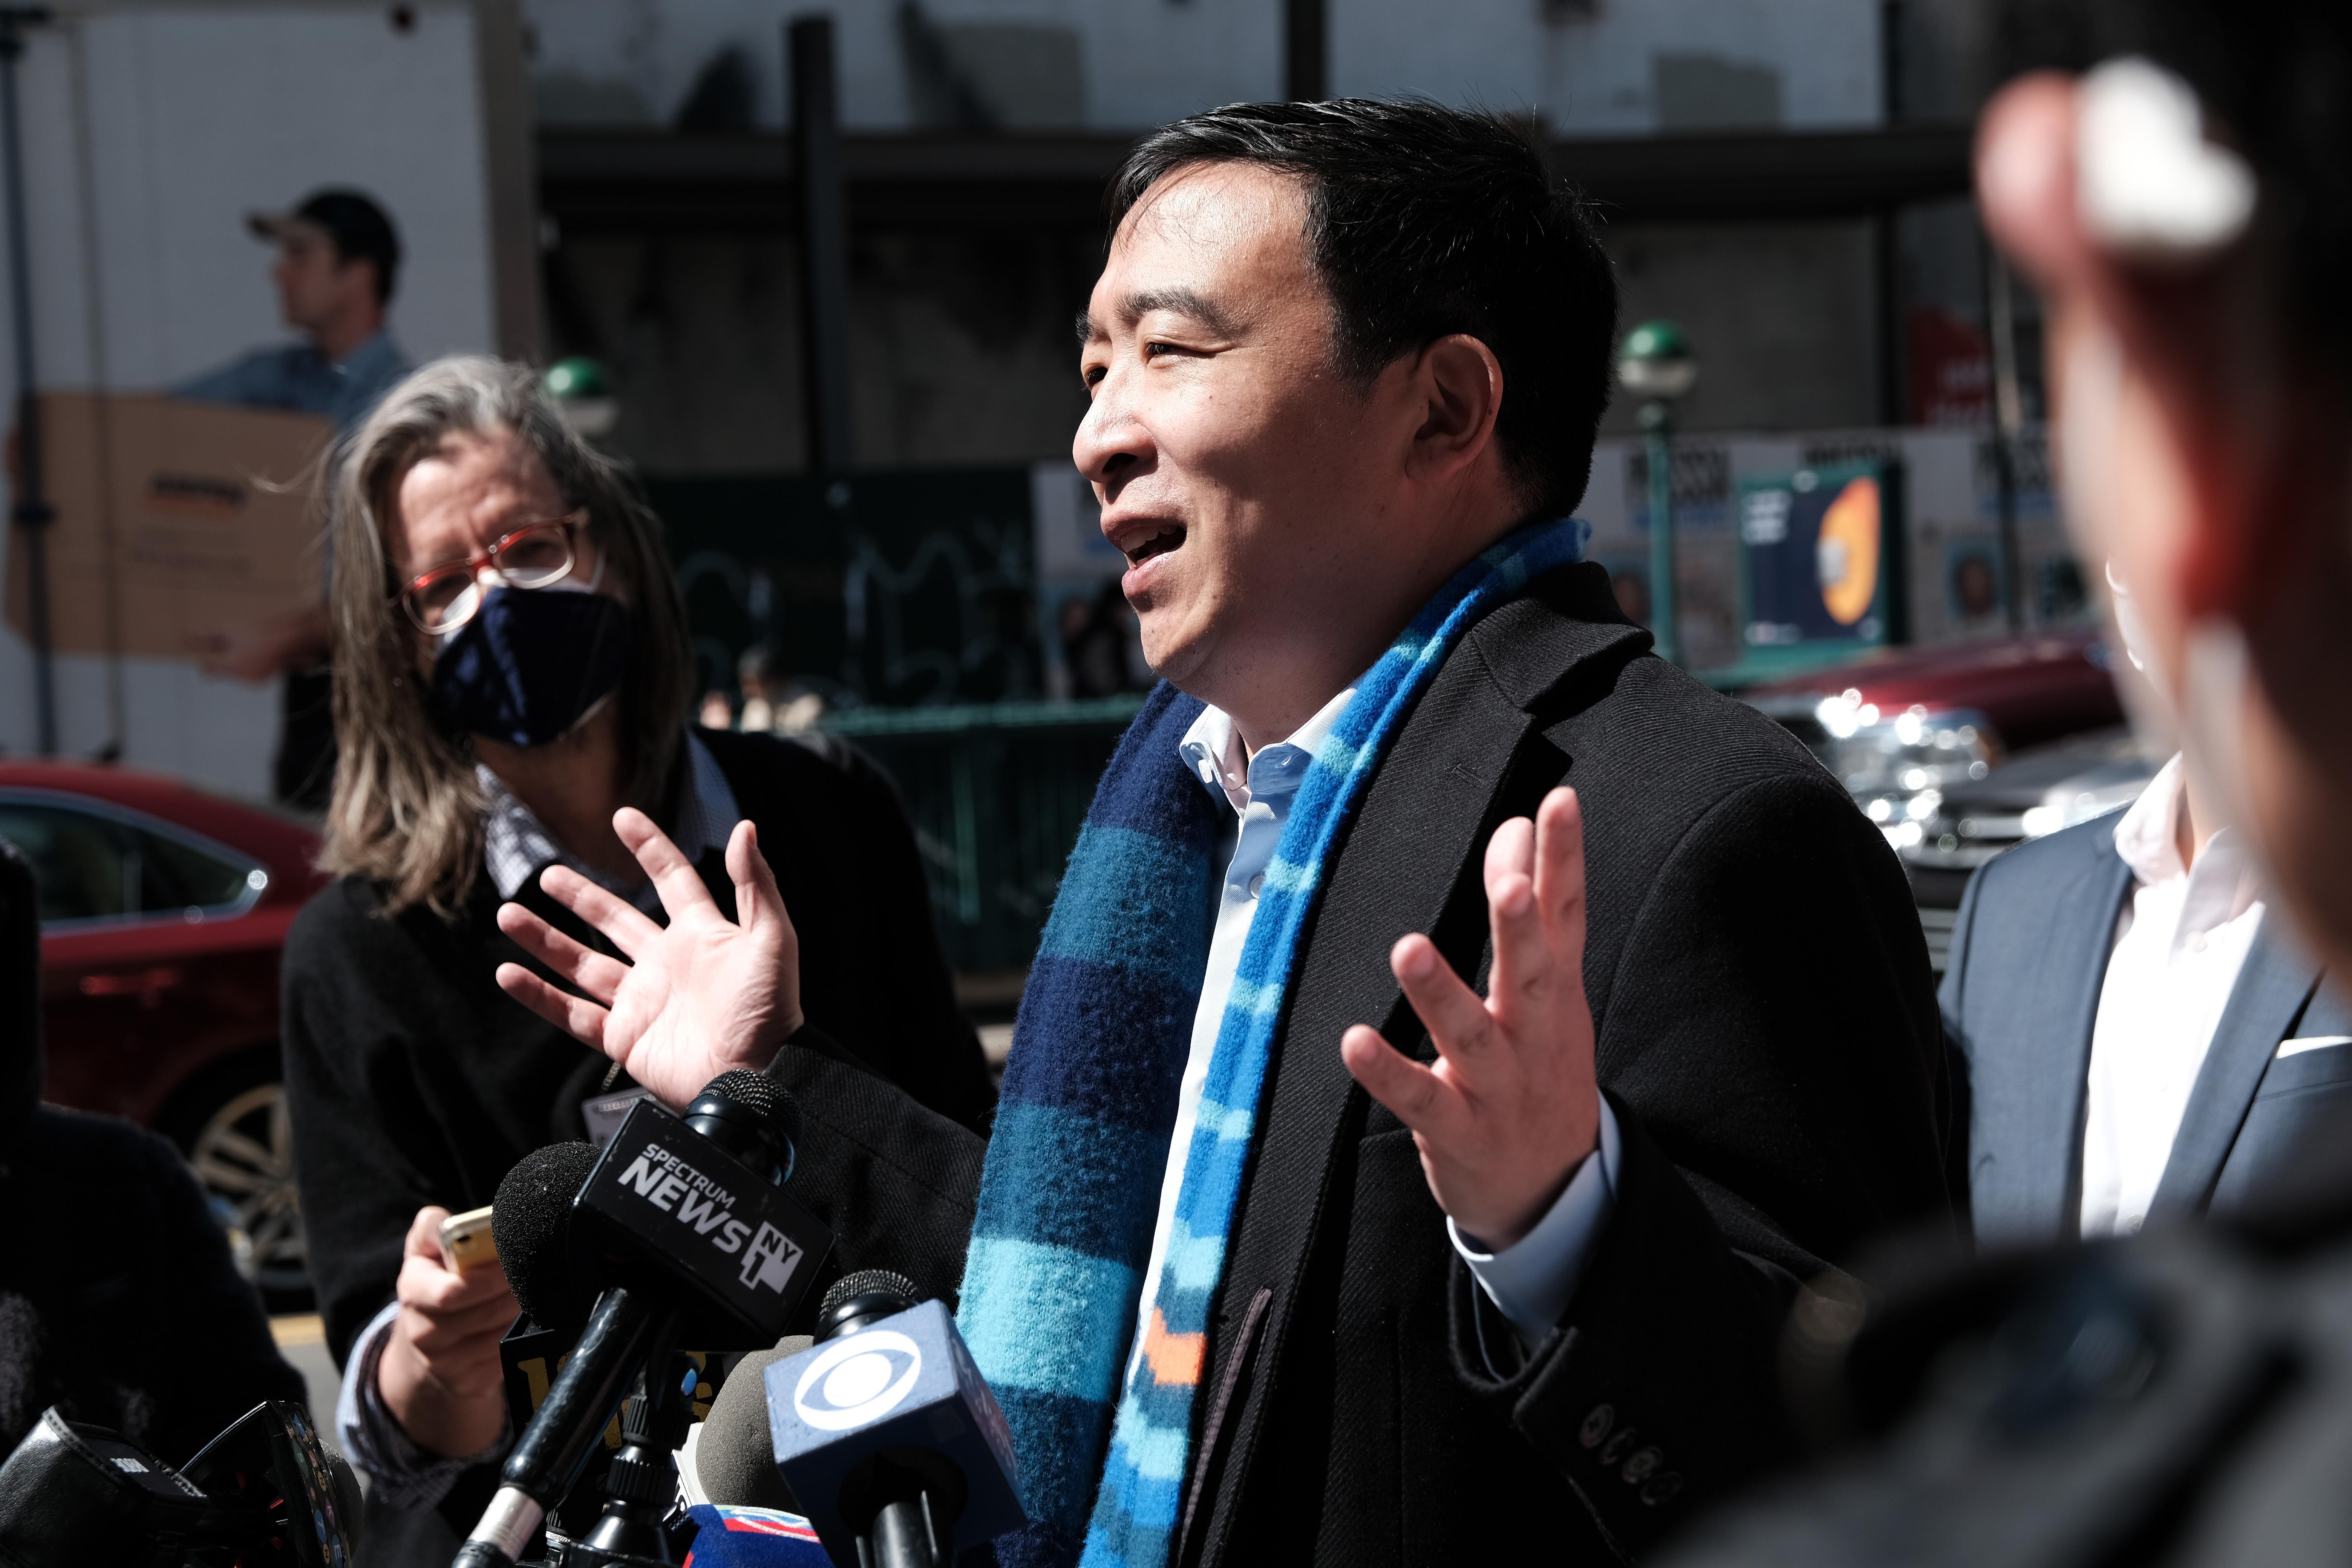 Andrew Yang gestures with both hands while speaking to members of the media in Chinatown on April 5